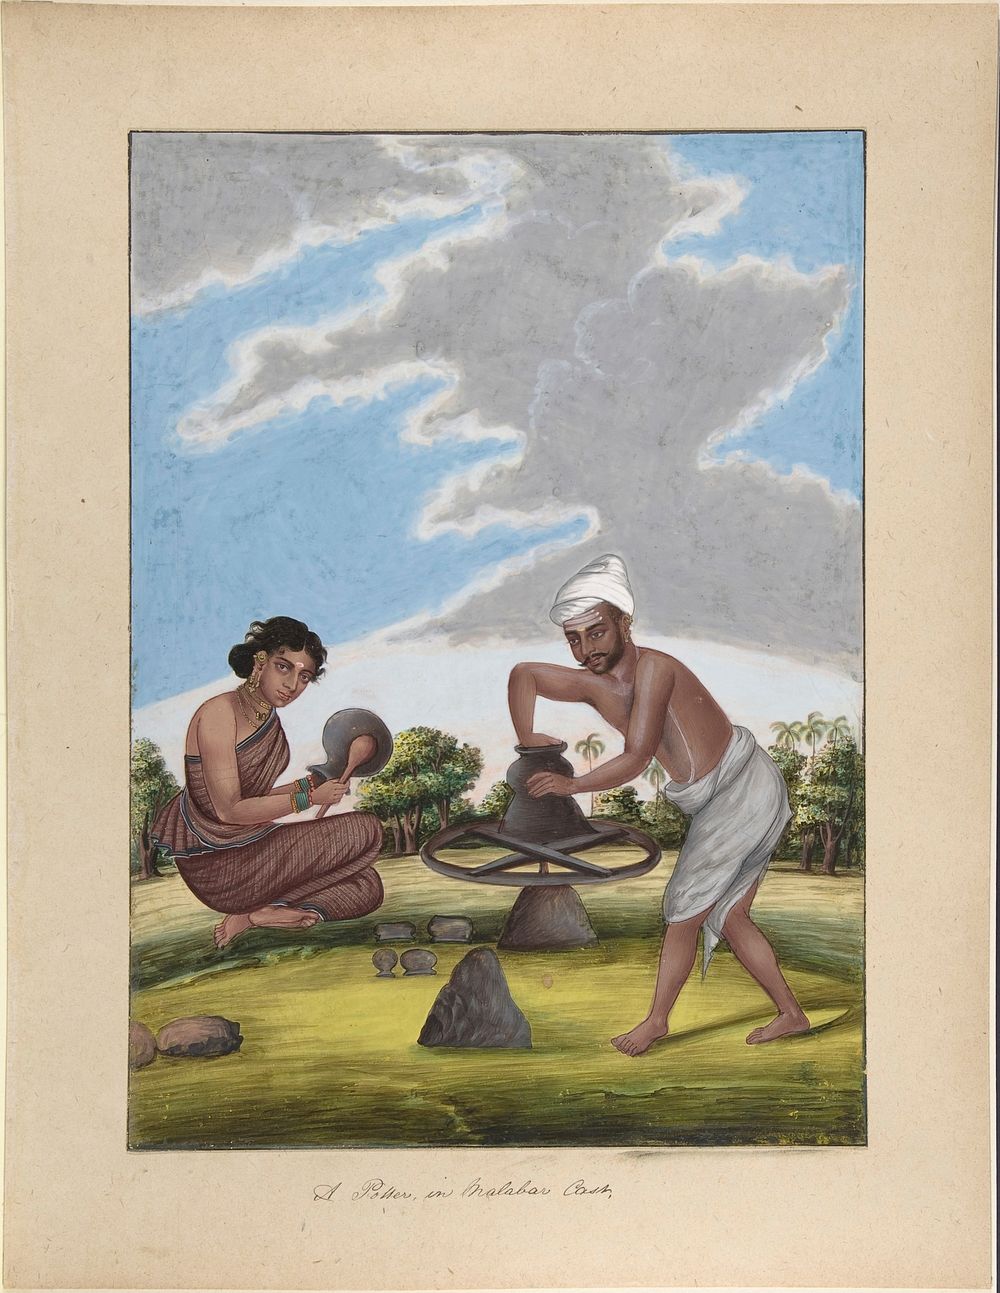 A Potter in Balabar Cast, from Indian Trades and Castes, Anonymous, Indian, 19th century